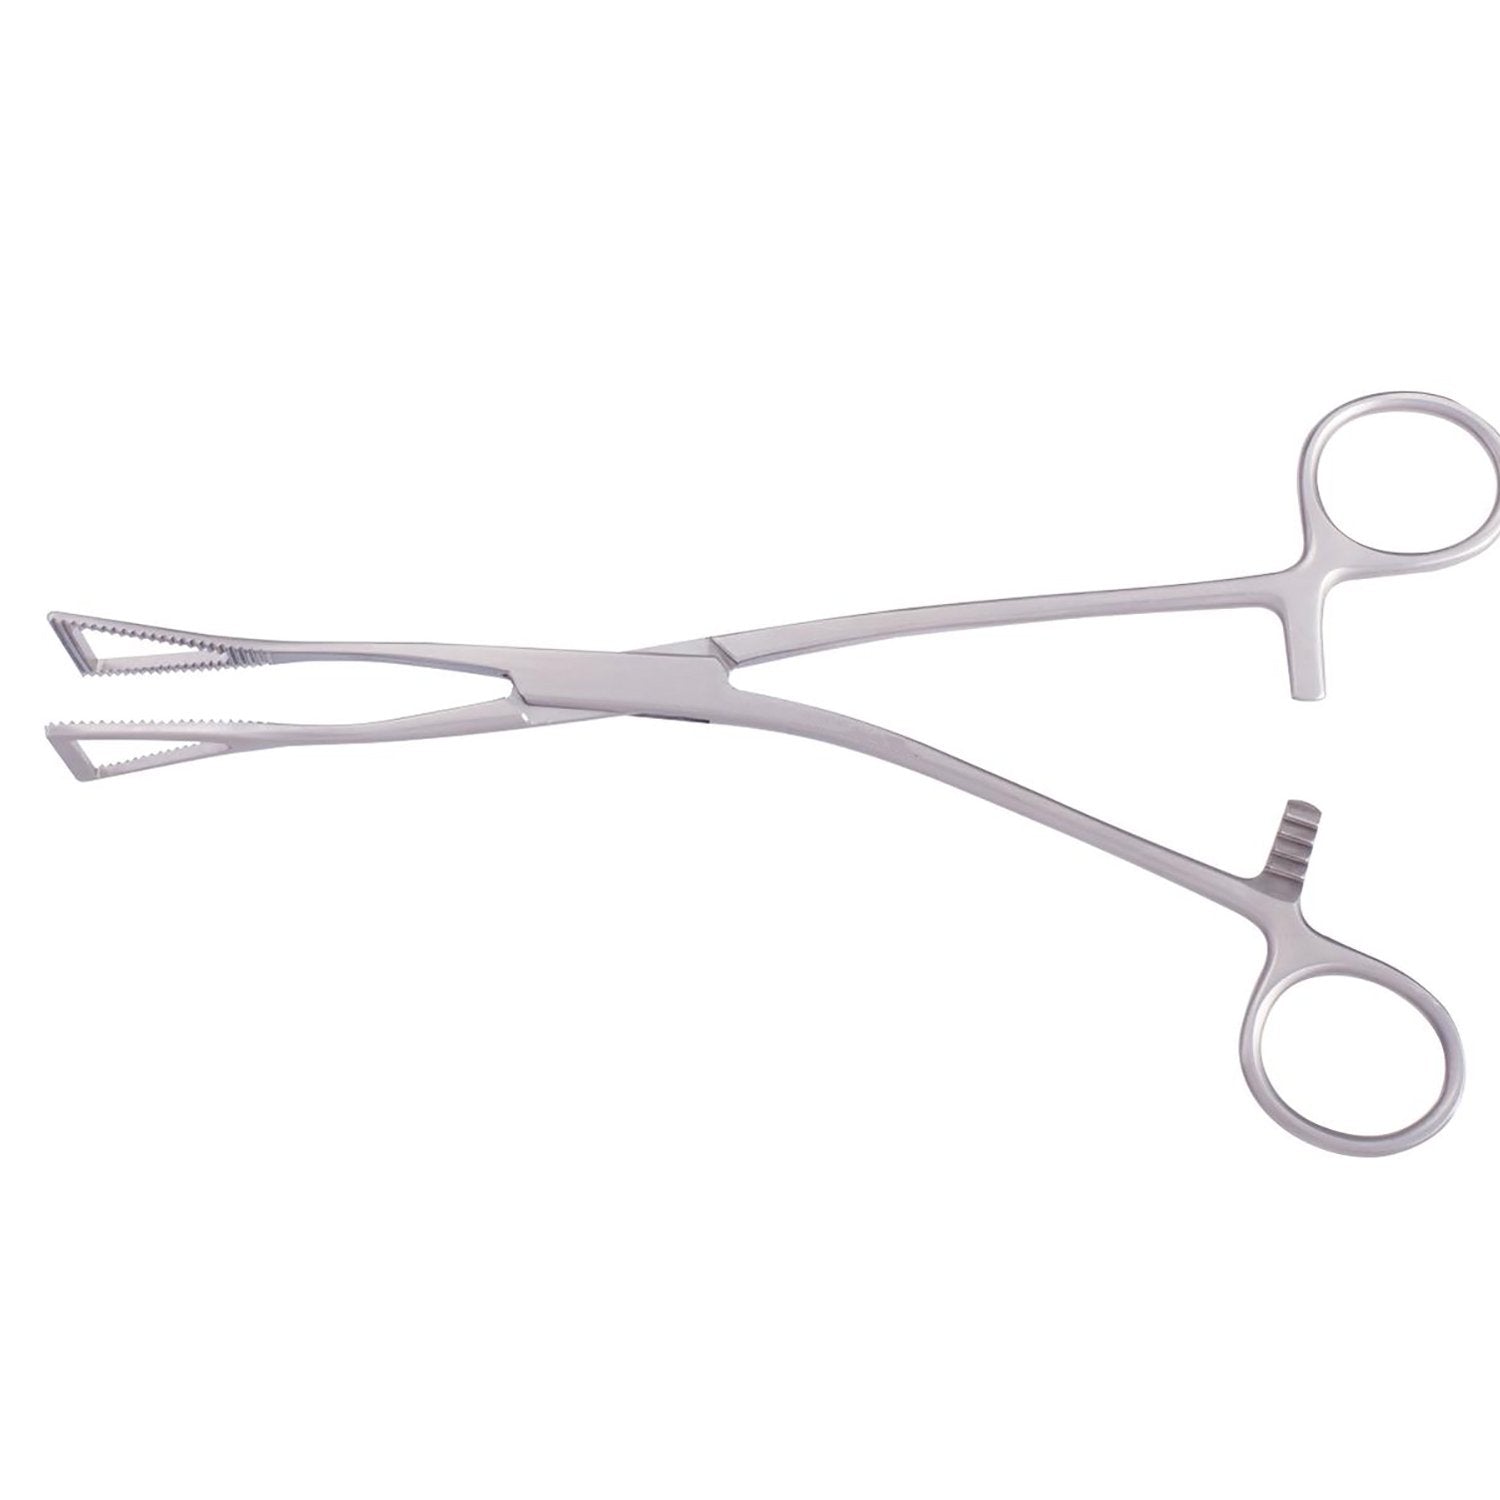 Lovelace Lung Forceps